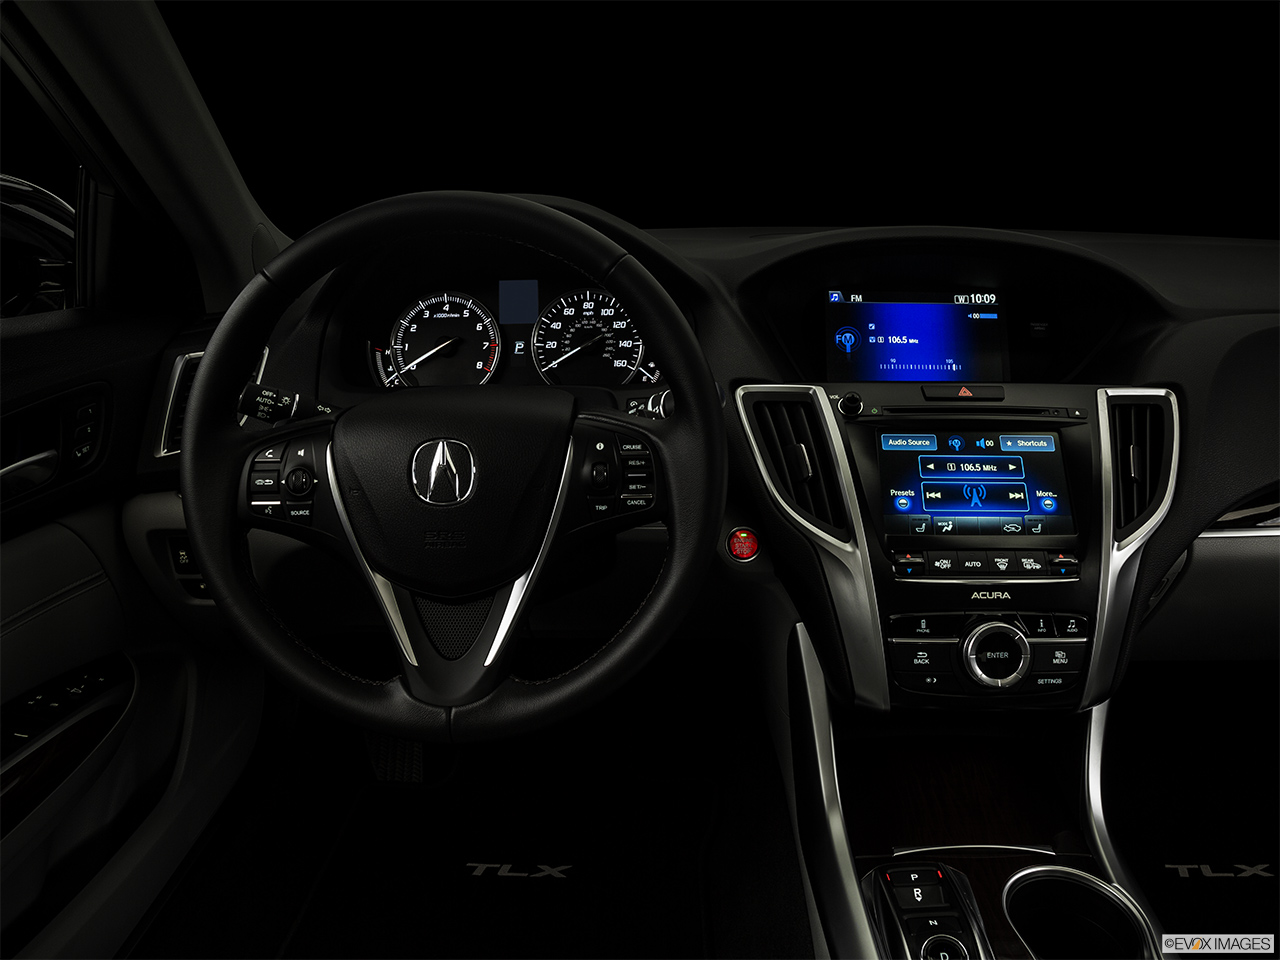 2016 Acura TLX 3.5 V-6 9-AT P-AWS Centered wide dash shot - "night" shot. 